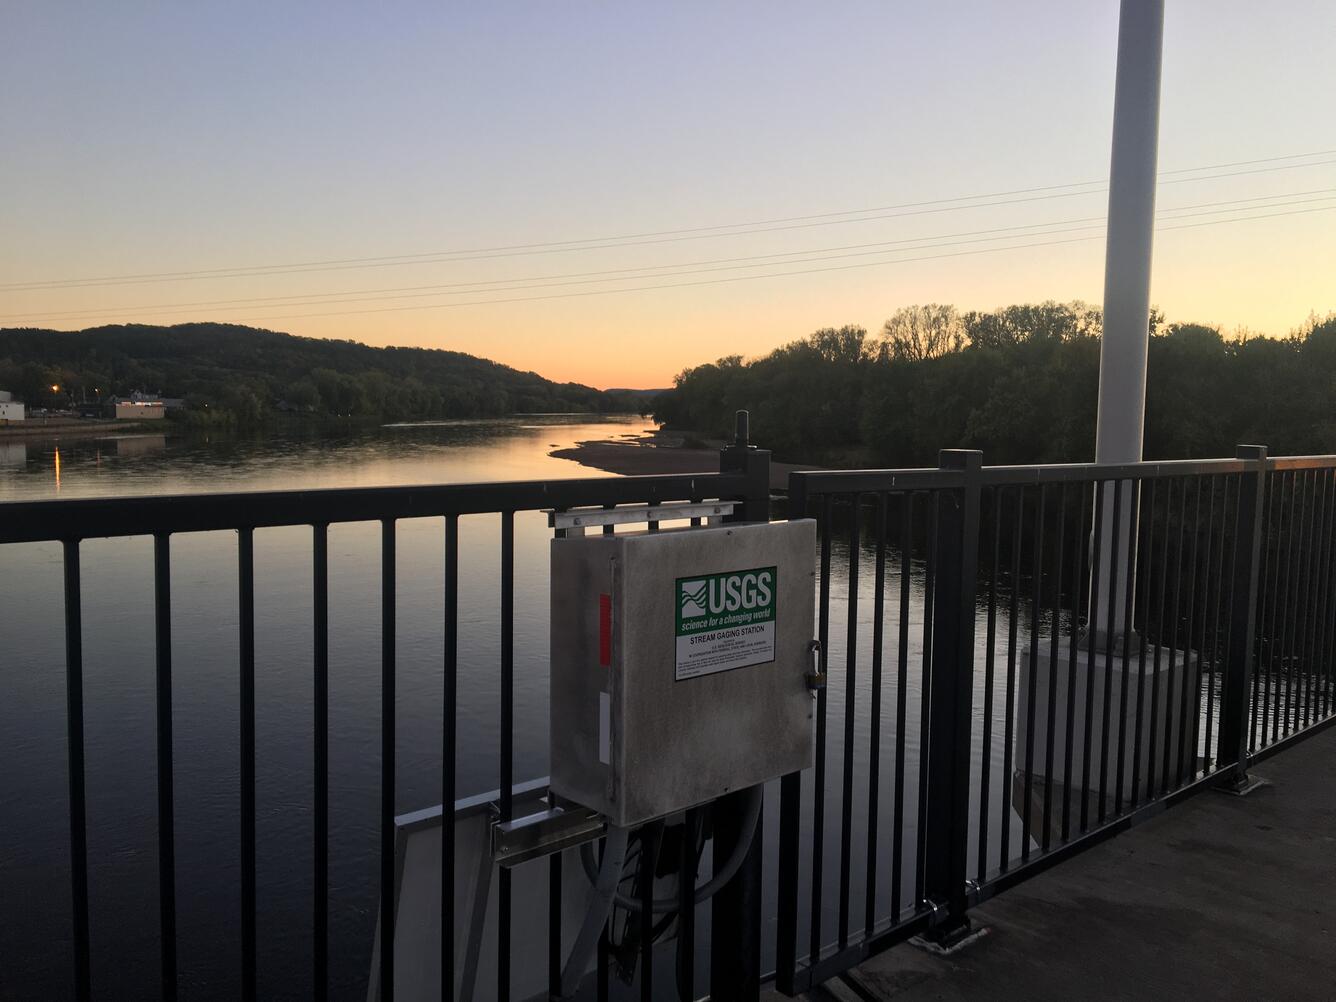 Streamgage mounted to bridge, view facing downstream river at dusk